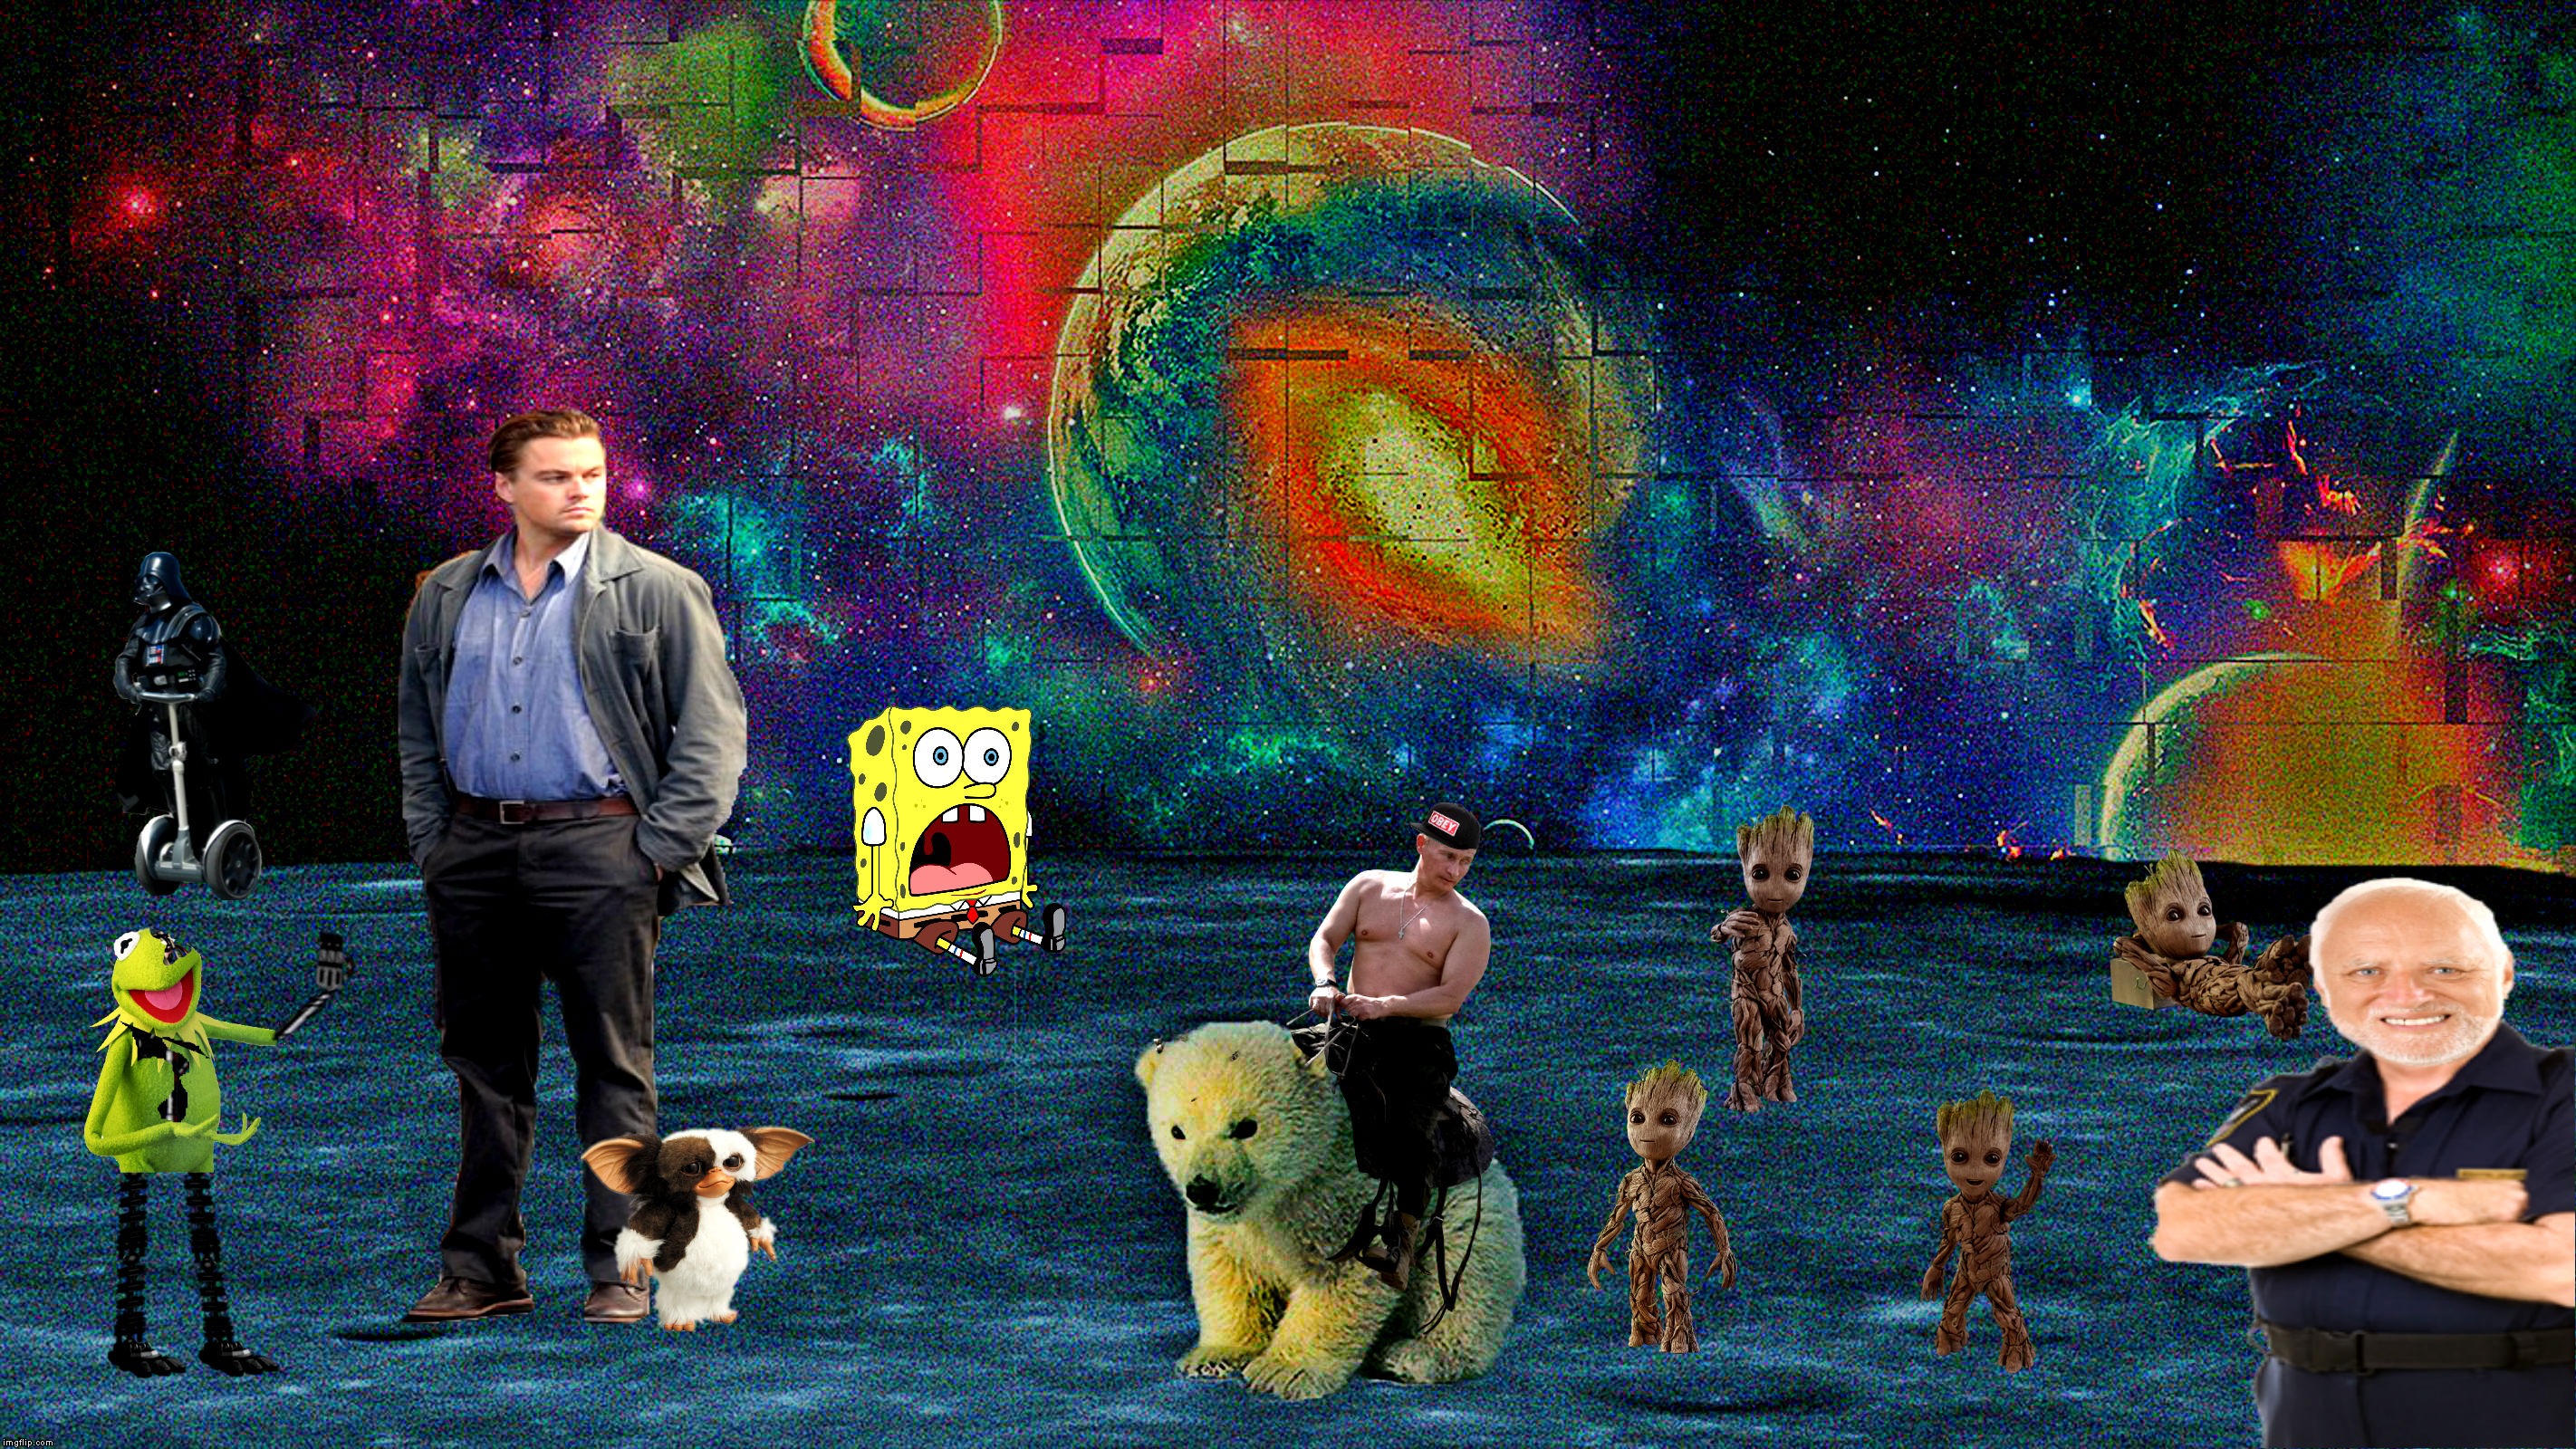 It took a planet of baby Groot's to make Leo stop strutting for a minute! Another Jying Wallpaper for those few who love them ;) |  SOMETHING FINALLY MADE LEO STOP STRUTTING | image tagged in wallpapers,leo dicaprio,strut,stop,wtf,memestrocity | made w/ Imgflip meme maker